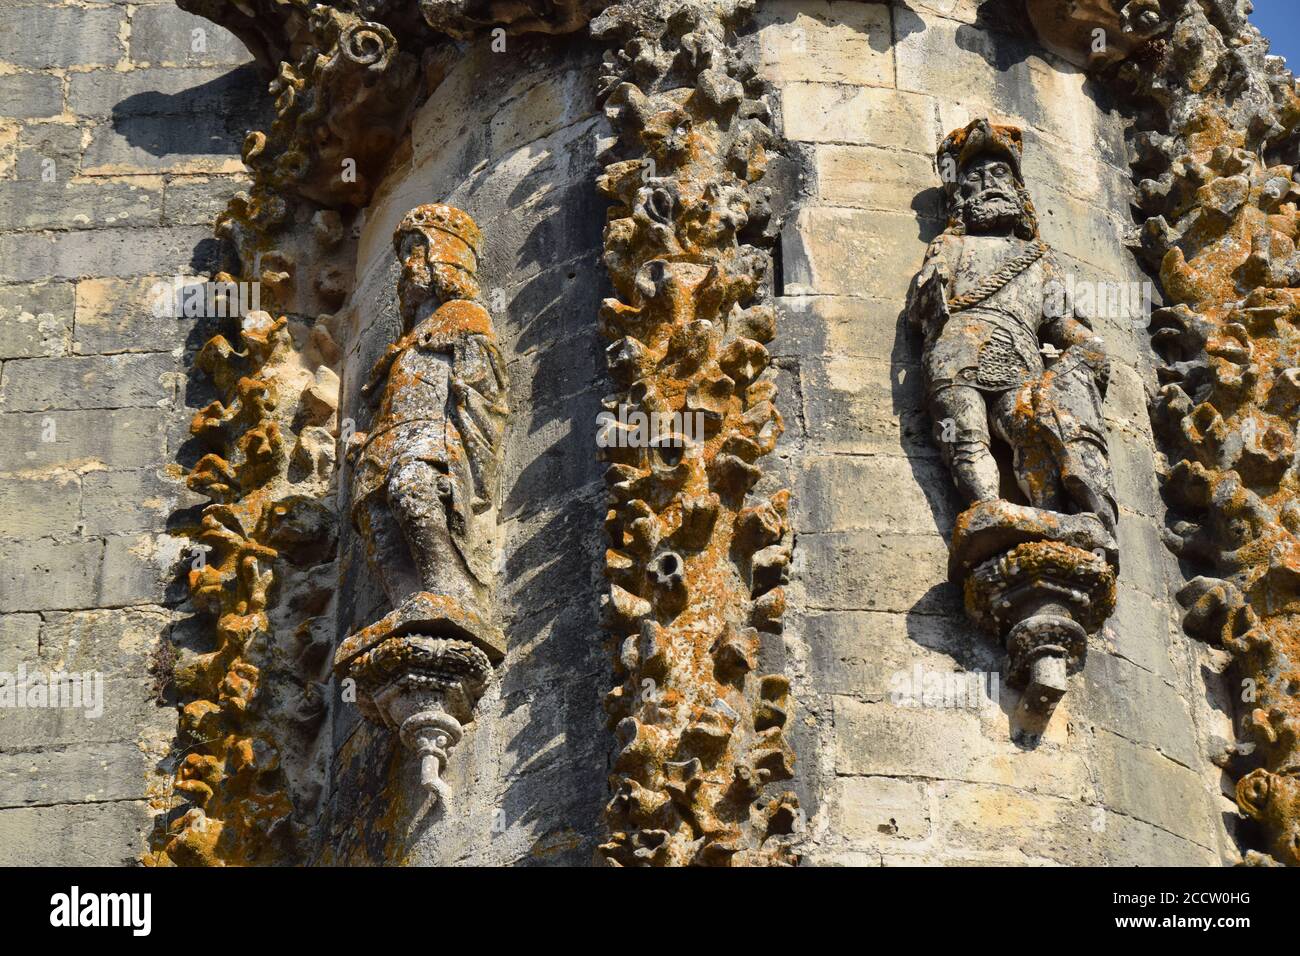 Convent of the Christ Tomar Portugal historical monument of the templars templarios details of the sculptures walls Stock Photo